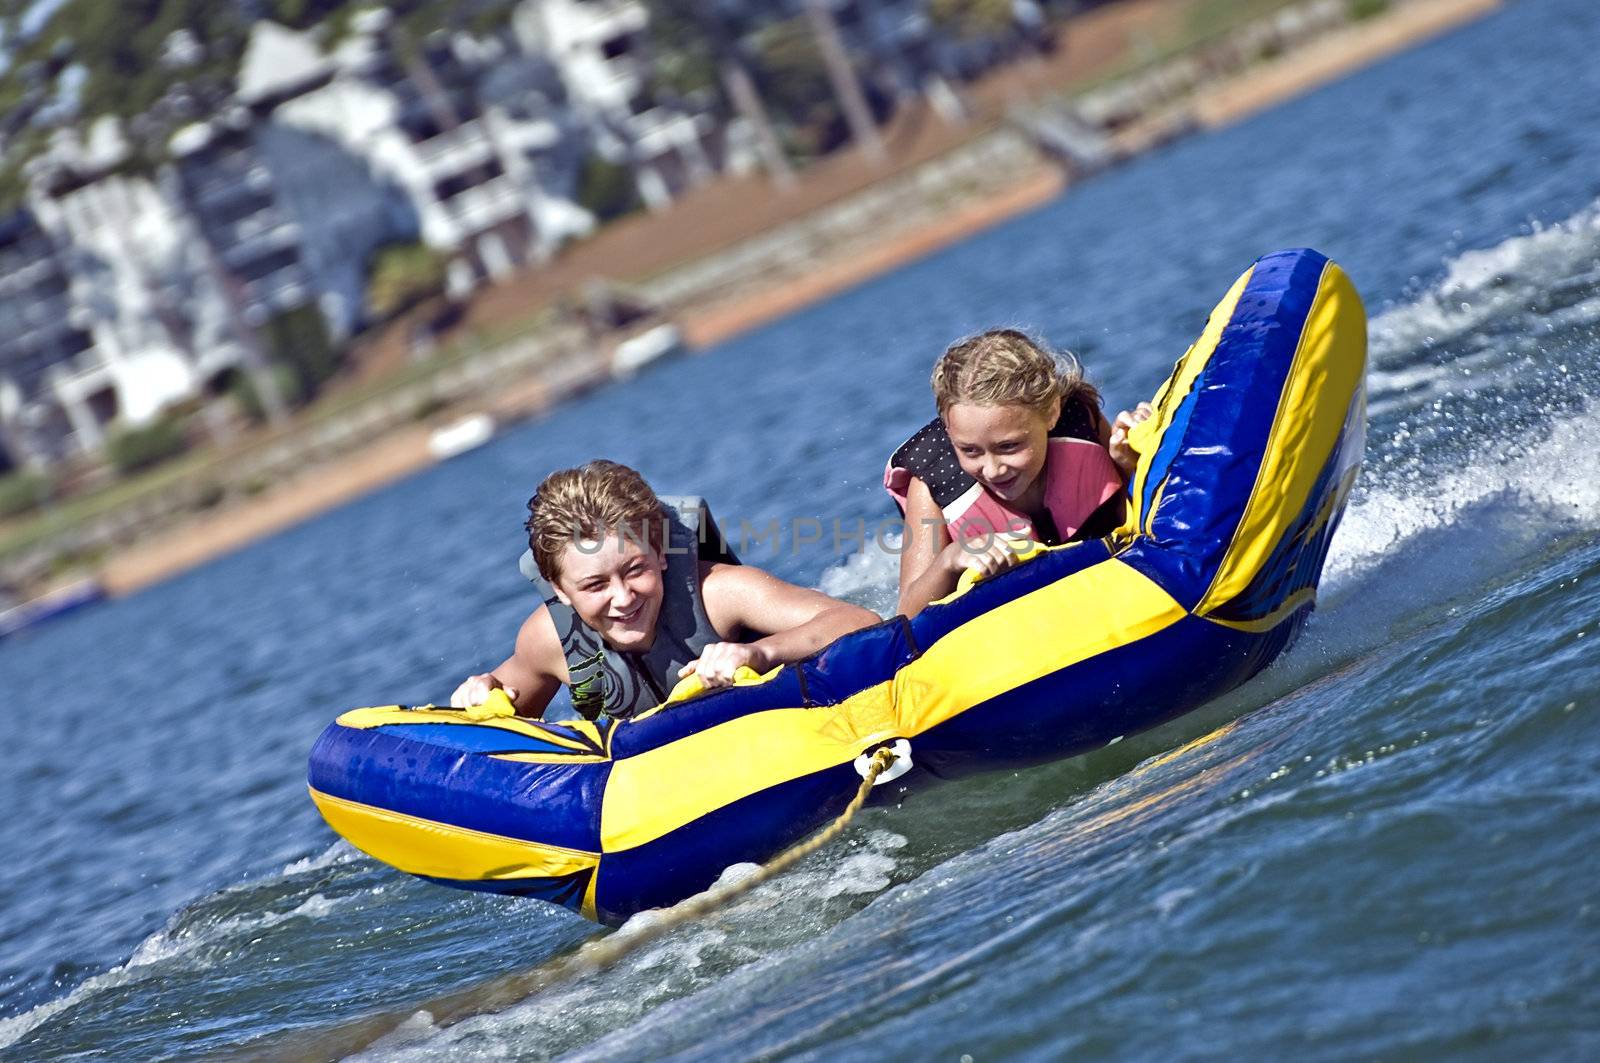 Young boy and girl on a tube behind a boat.